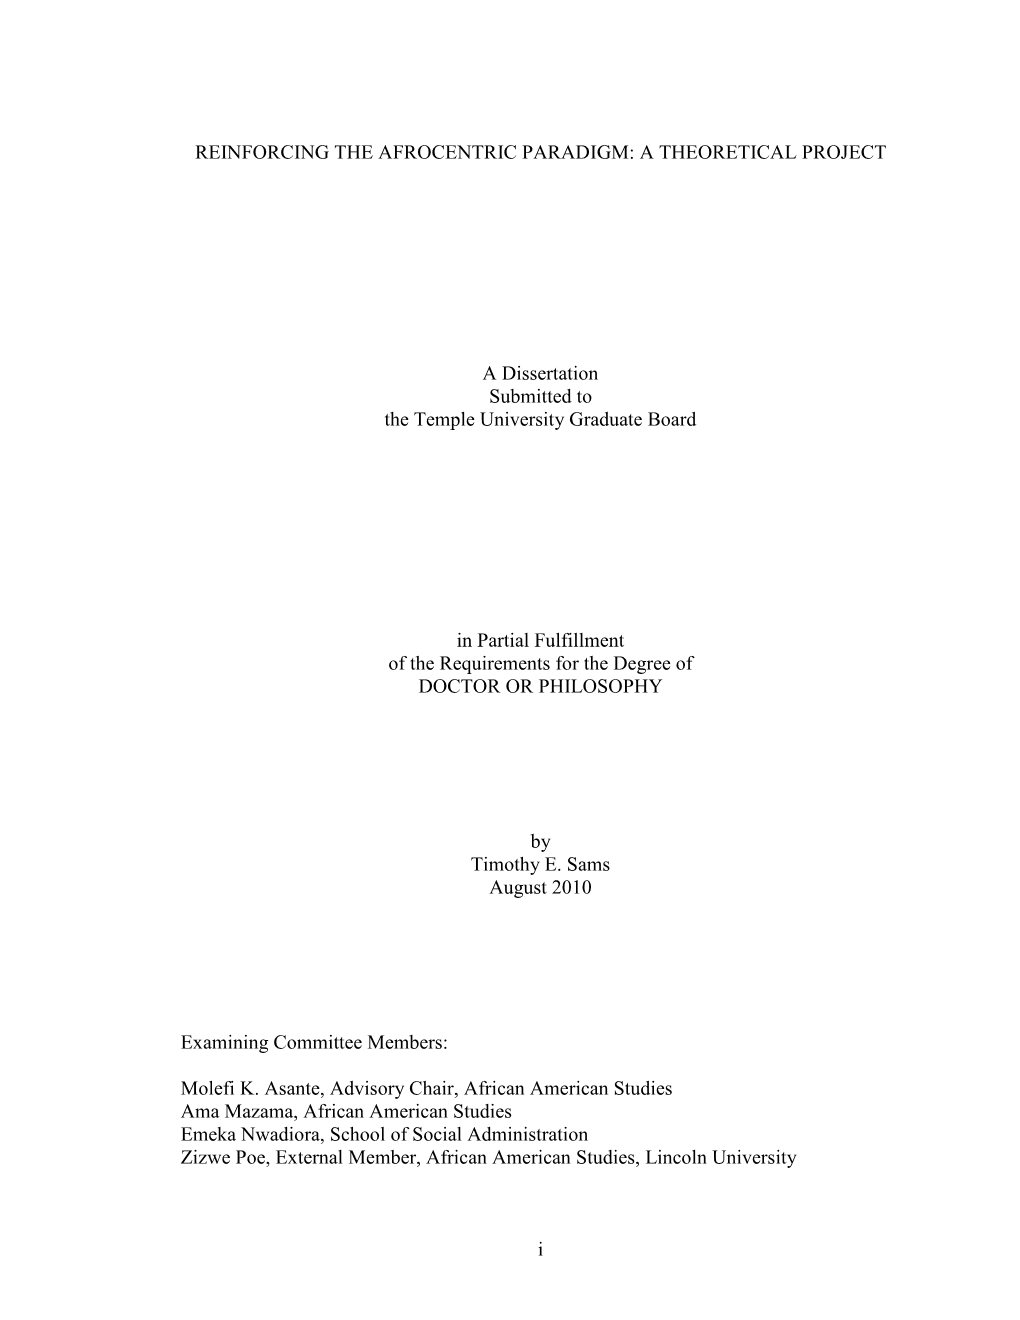 A THEORETICAL PROJECT a Dissertation Submitted to The